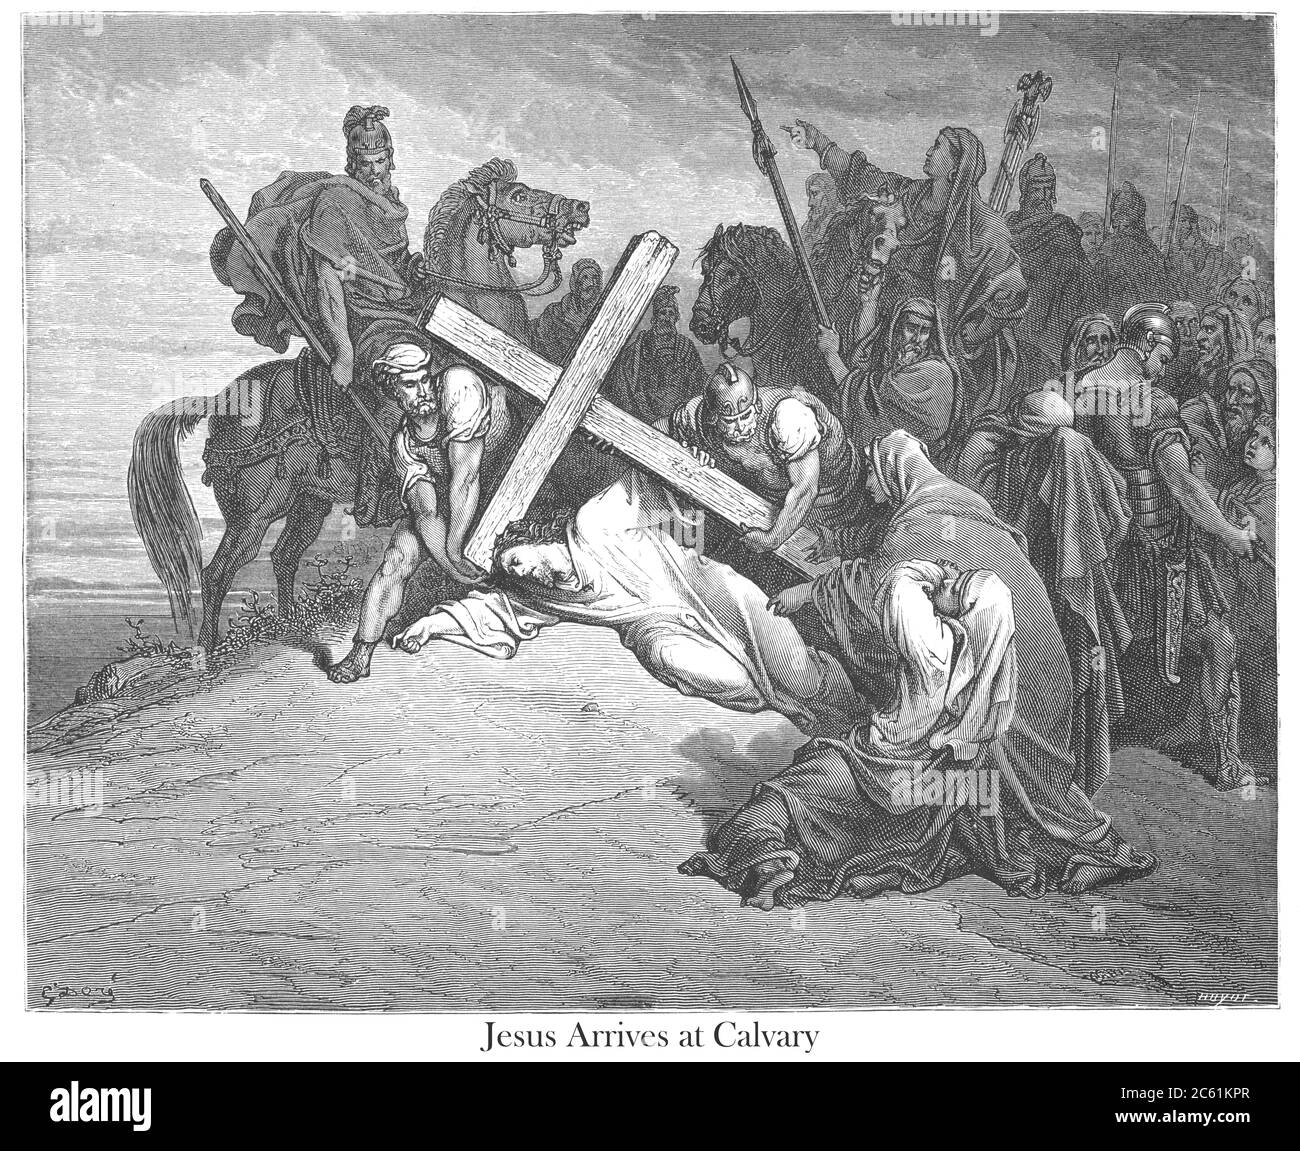 Jesus Arrives at Calvary [Matthew 27:33-34] From the book 'Bible Gallery' Illustrated by Gustave Dore with Memoir of Dore and Descriptive Letter-press by Talbot W. Chambers D.D. Published by Cassell & Company Limited in London and simultaneously by Mame in Tours, France in 1866 Stock Photo